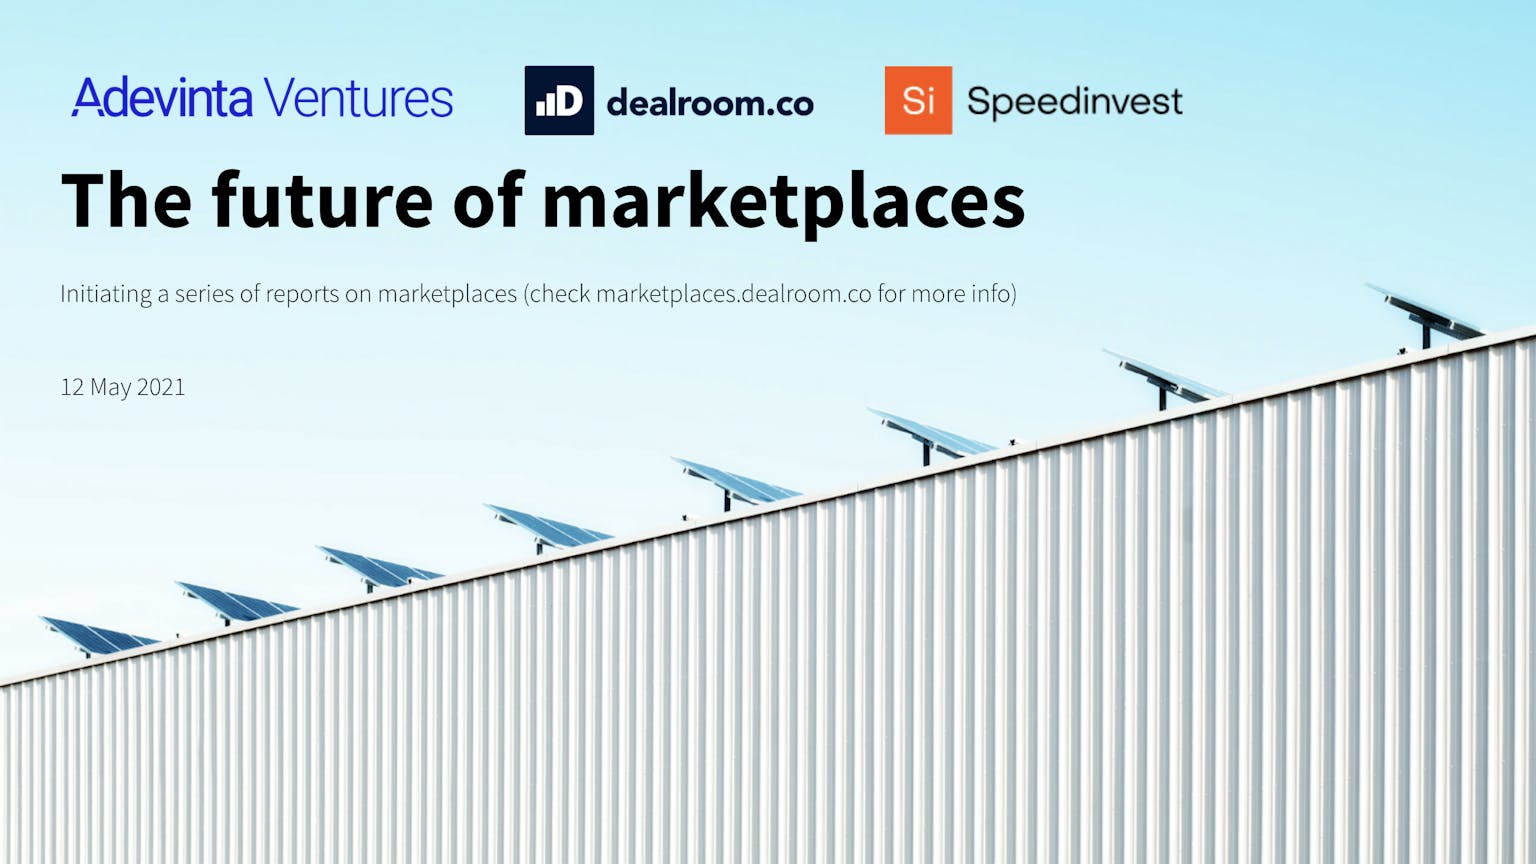 The future of marketplaces